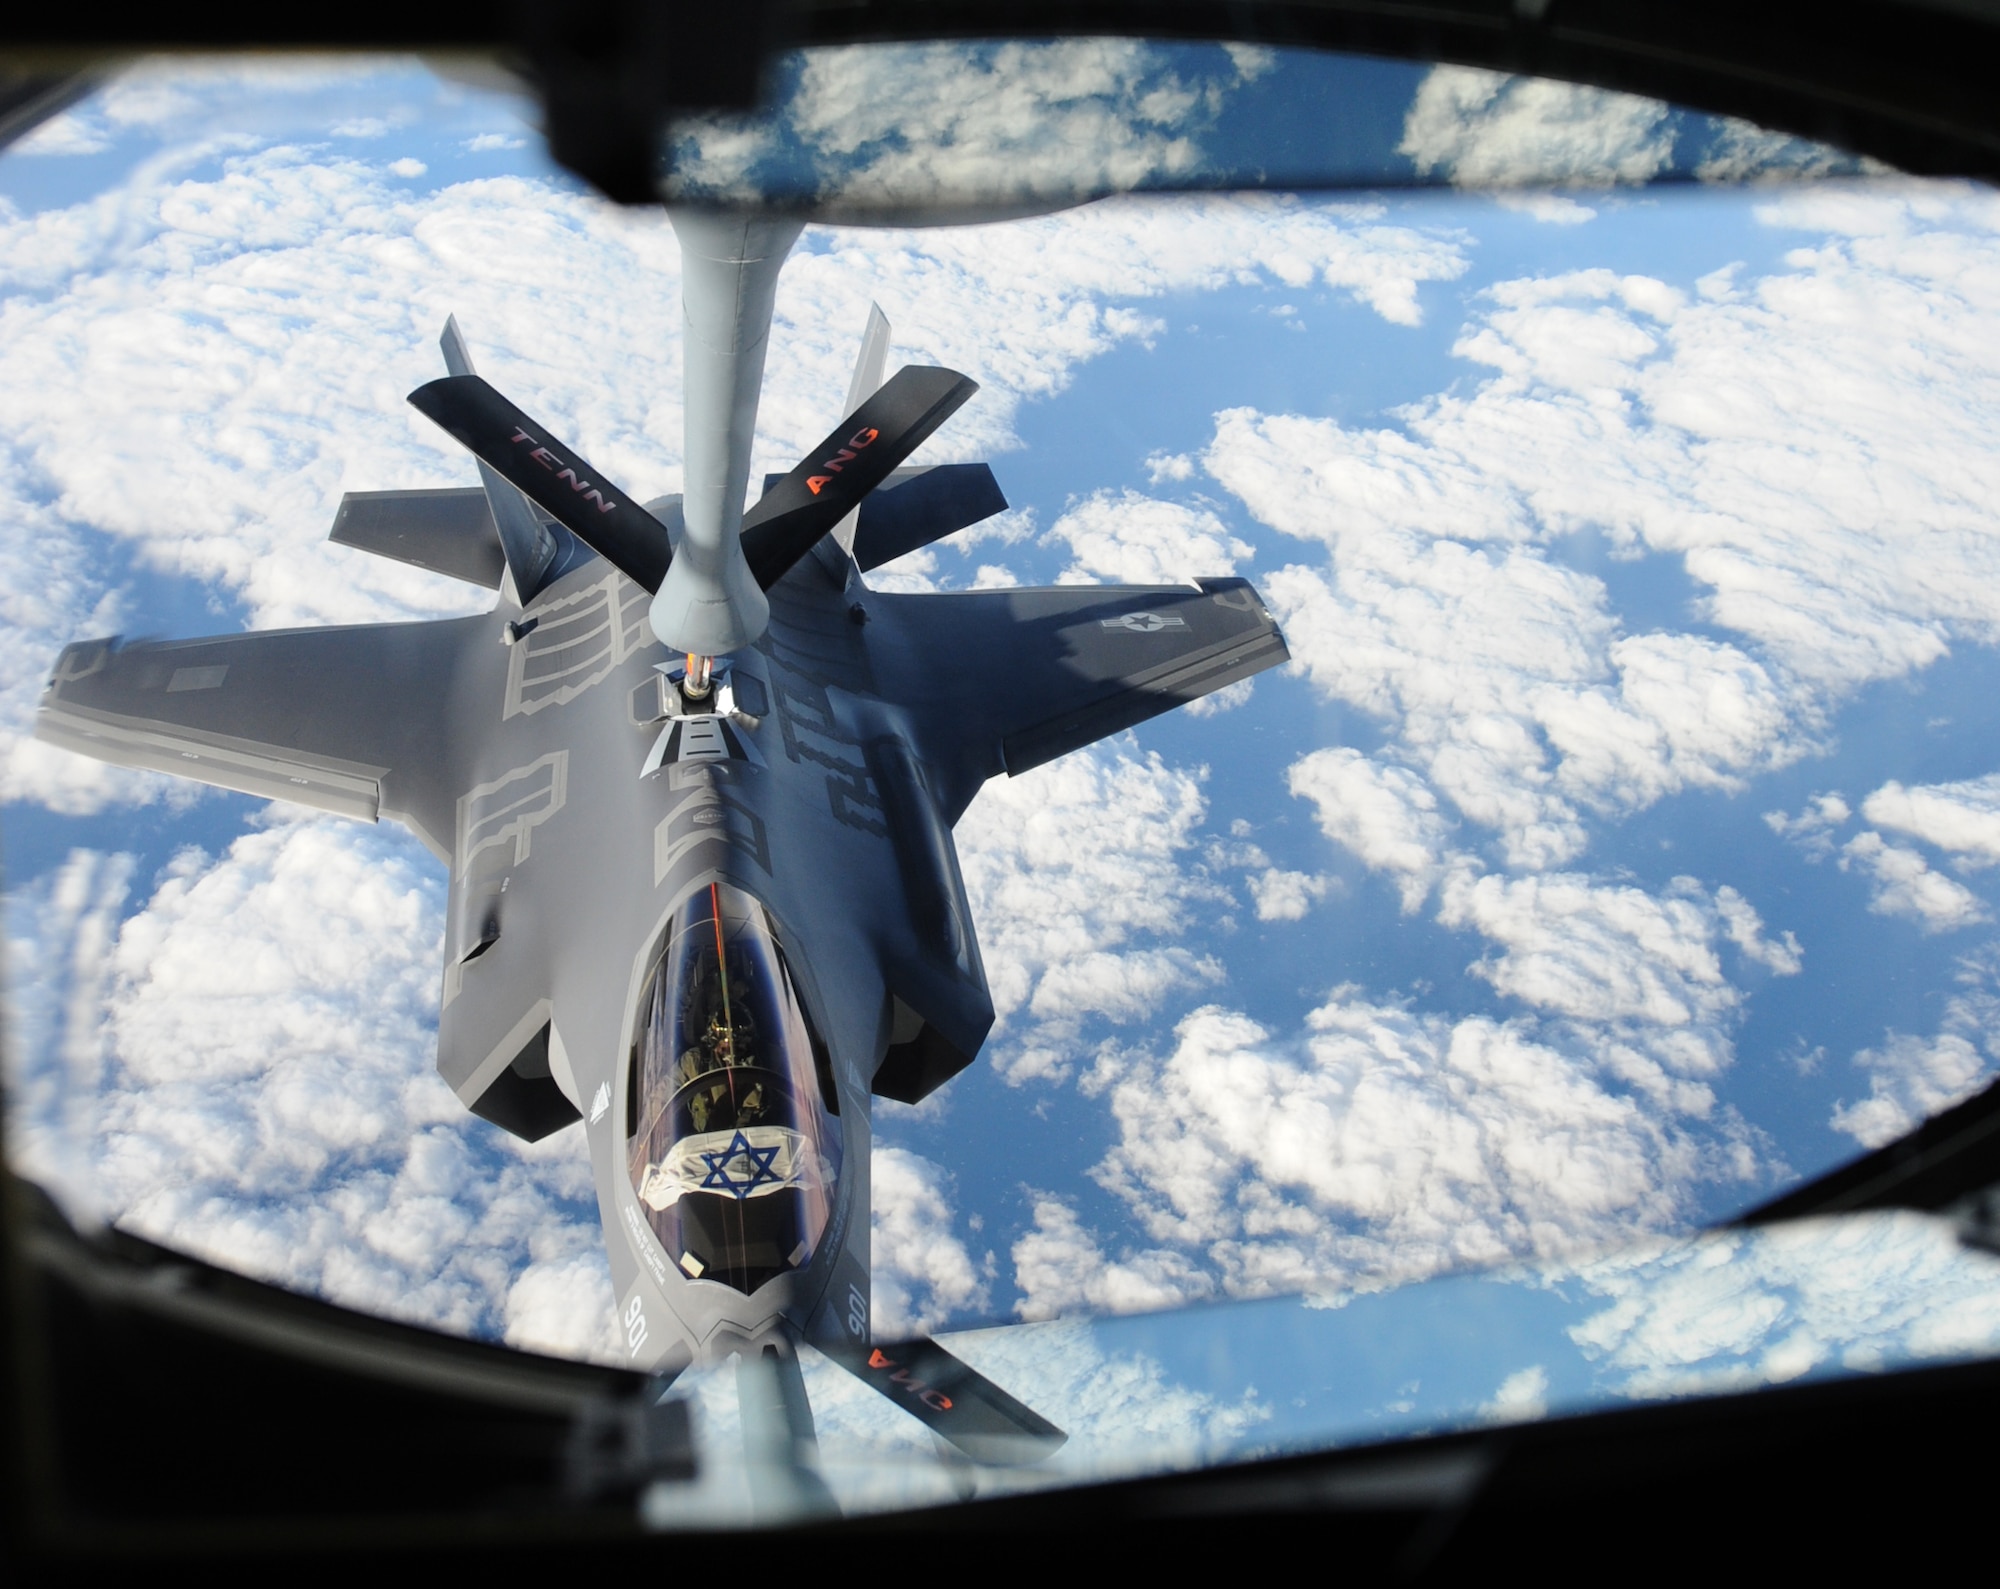 An Israeli F-35 “Adir” receives fuel from a Tennessee Air National Guard KC-135 as the aircraft make the flight across the Atlantic, Dec, 6, 2016. The U.S.-made F-35s will be Israel’s first fifth generation fighter aircraft and were refueled multiple times while en route to ensure their safe delivery to Israel. (U.S. Air Force photo by 1st Lt. Erik D. Anthony)